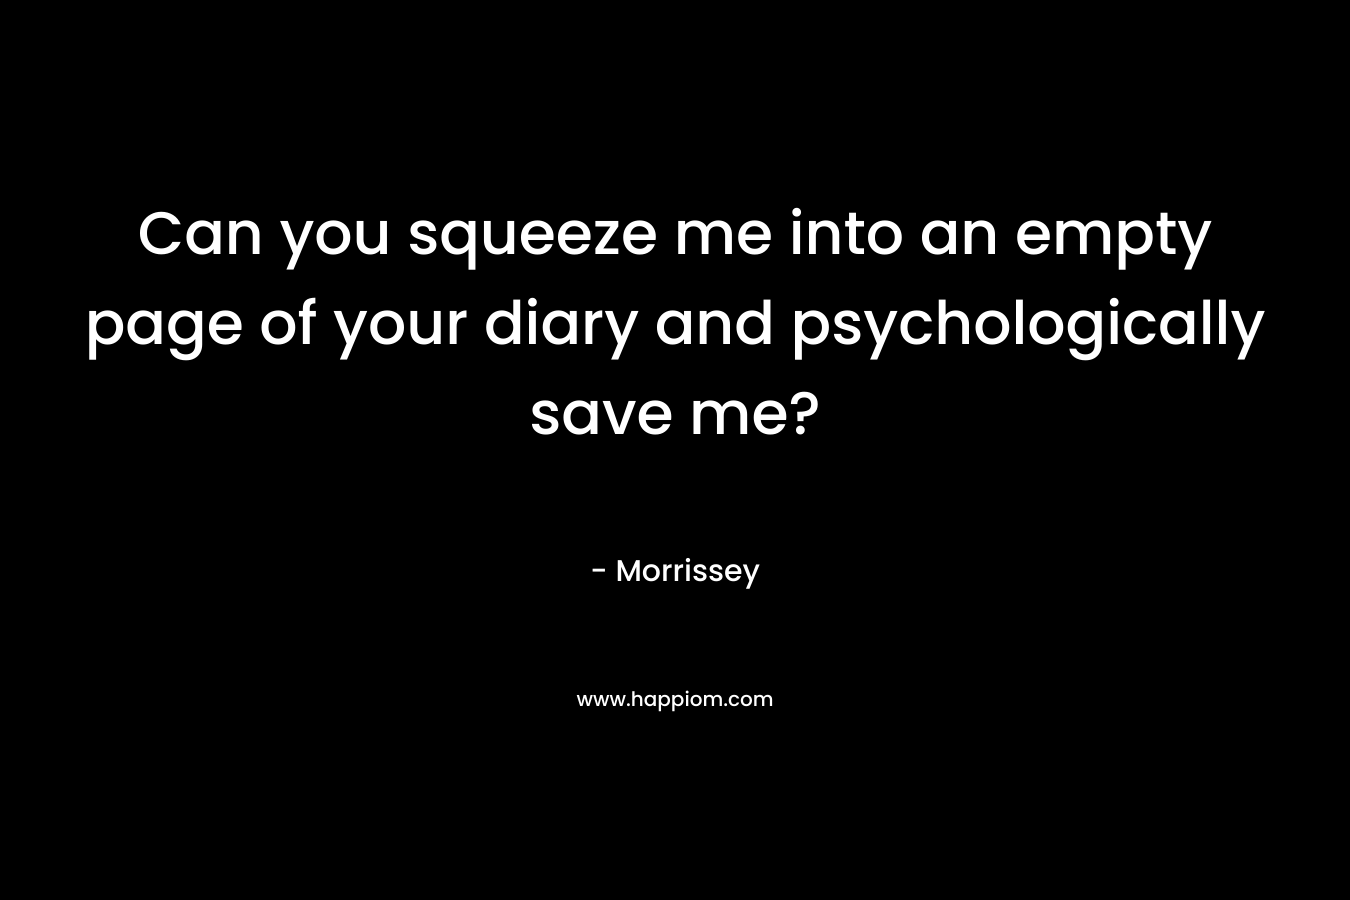 Can you squeeze me into an empty page of your diary and psychologically save me?